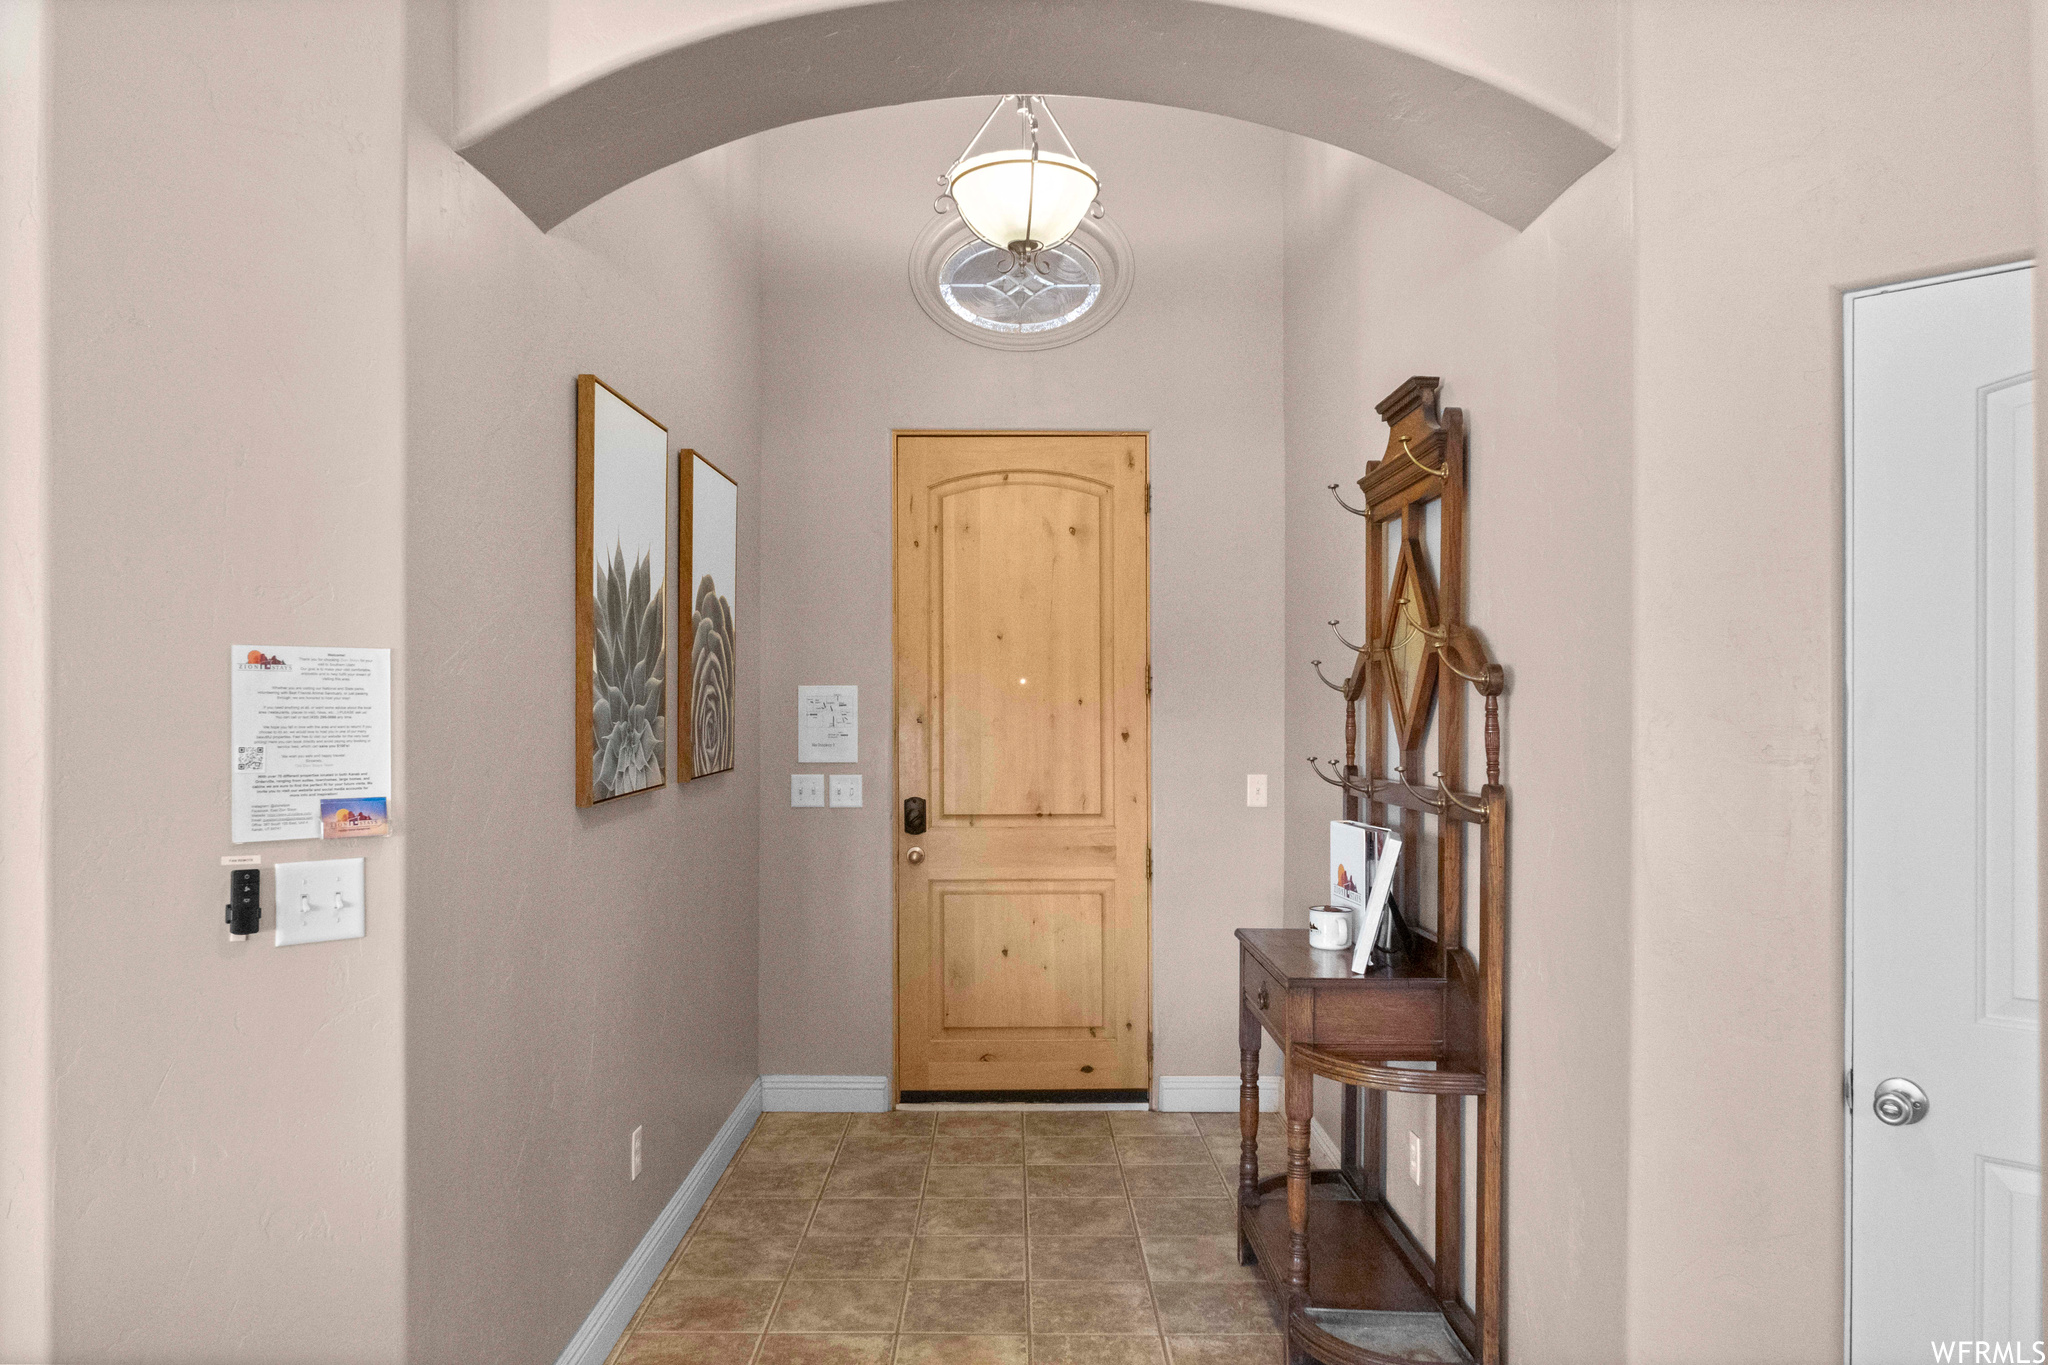 Arched Entry